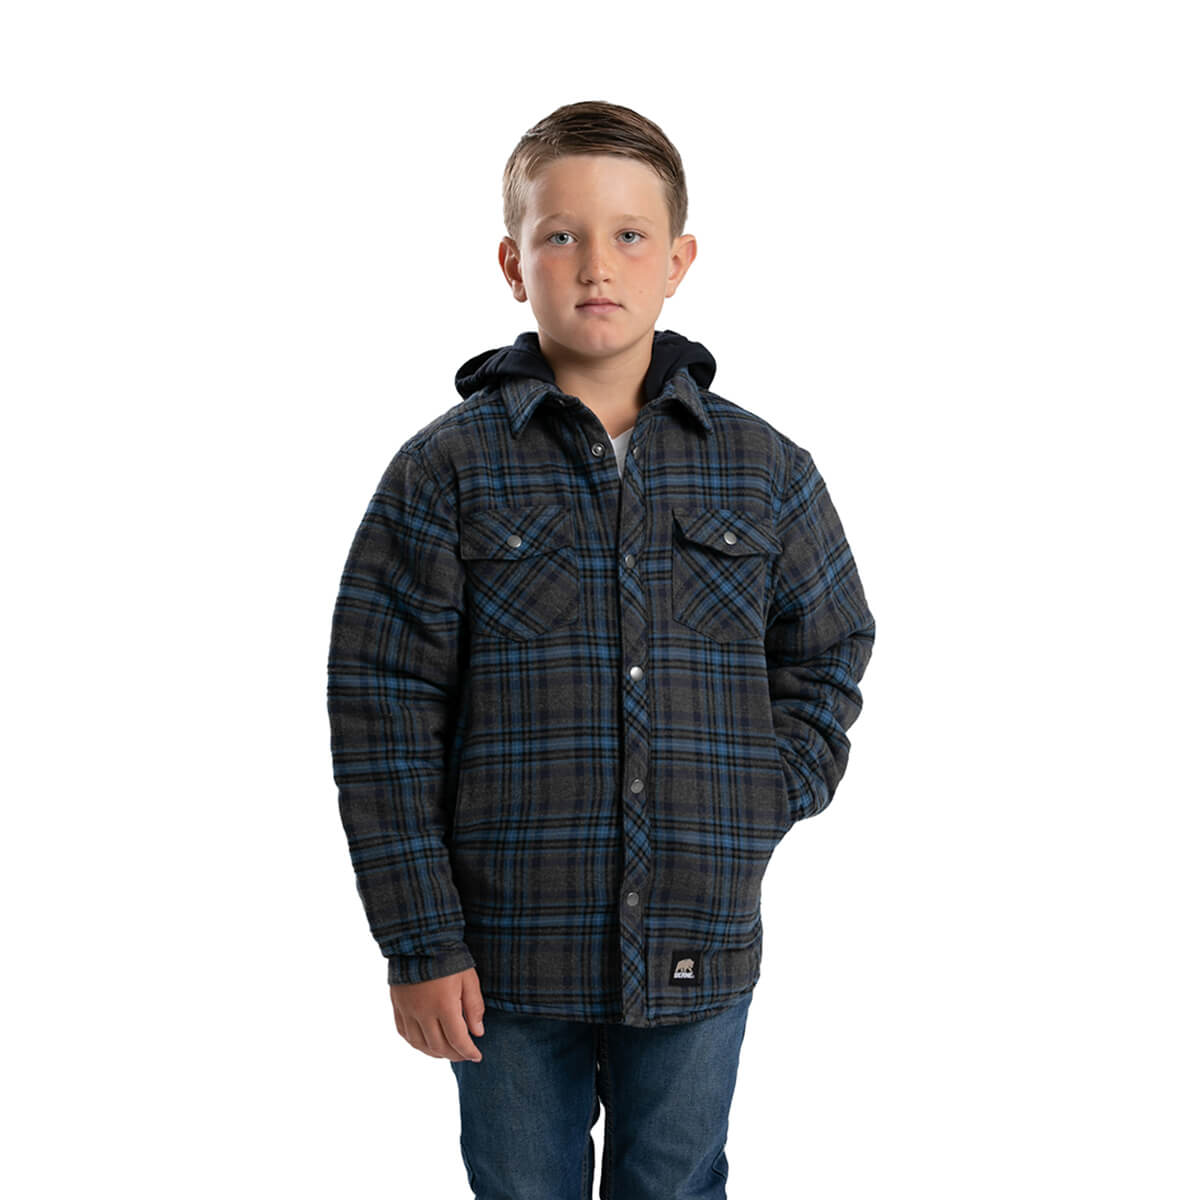 Berne Youth Heartland Quilt Lined Flannel Hooded Jacket - Gray/Plaid